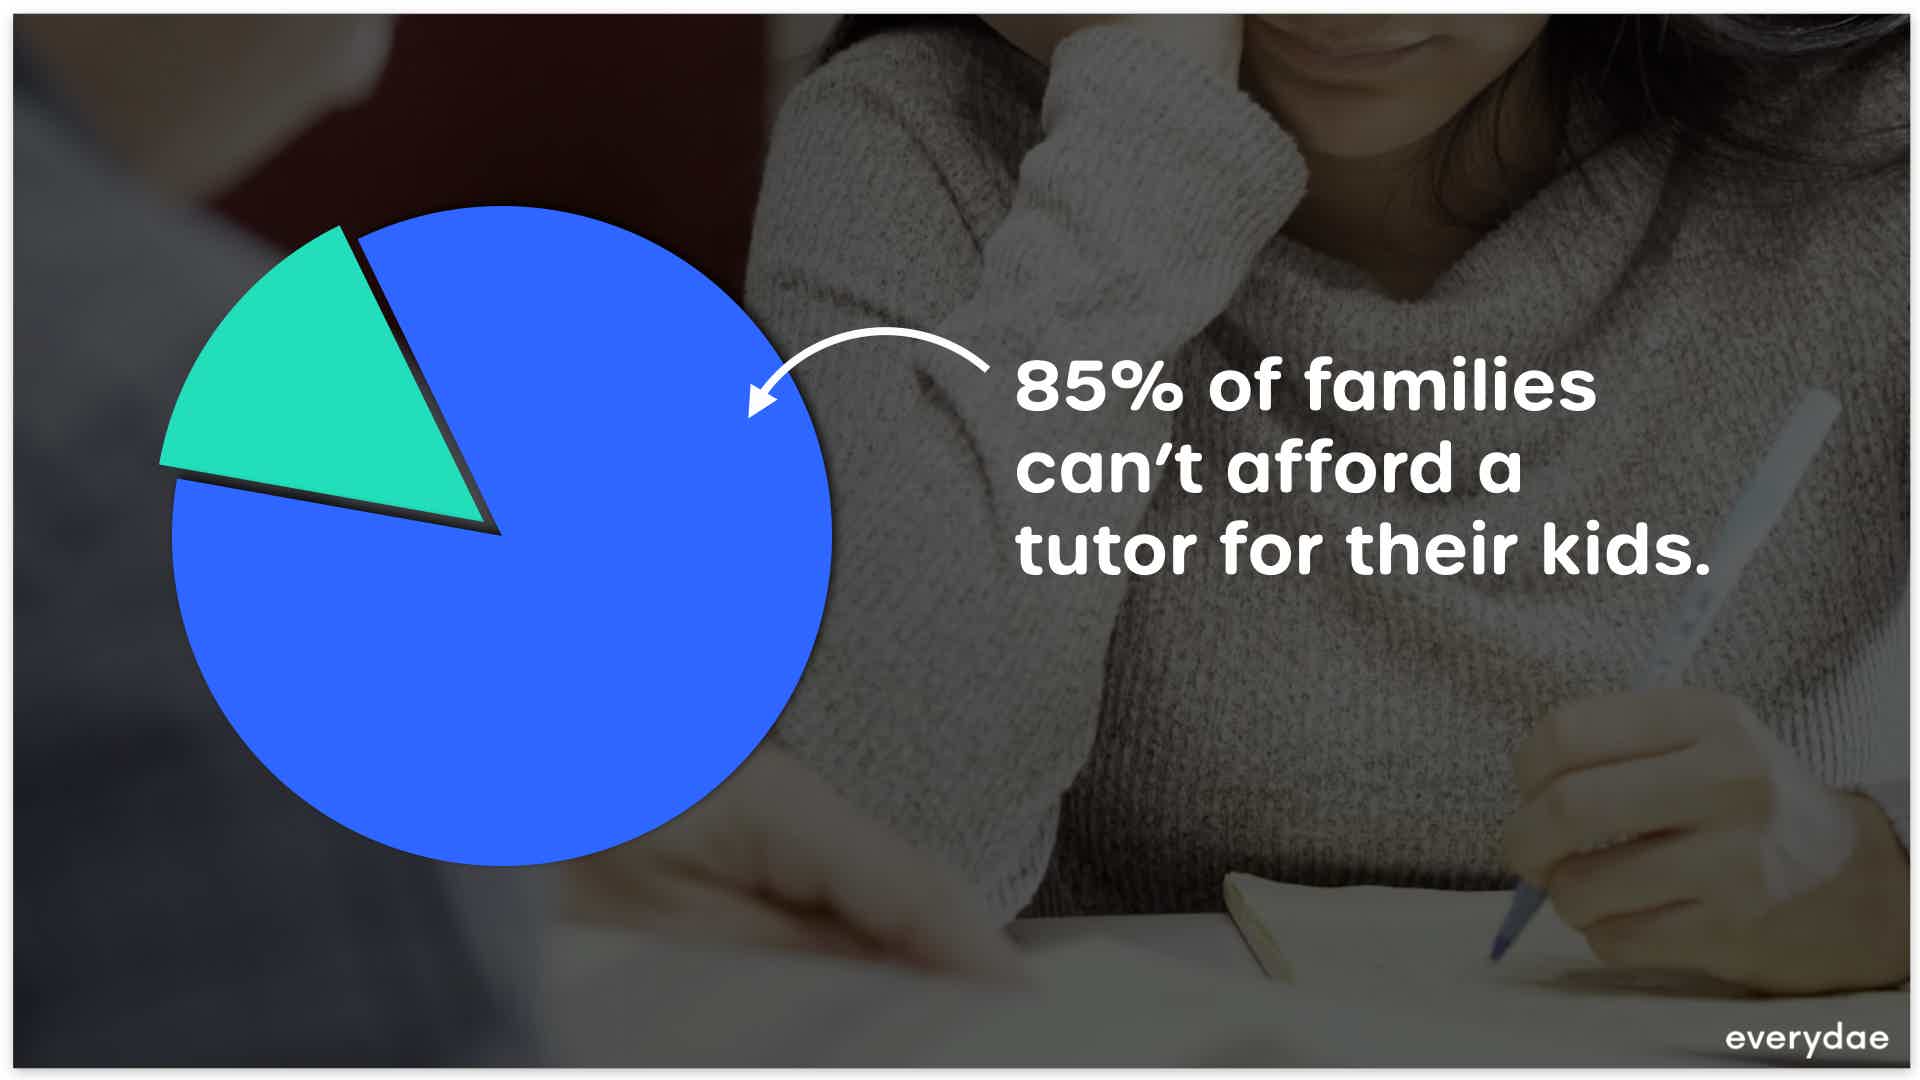 85% of families can't afford a tutor